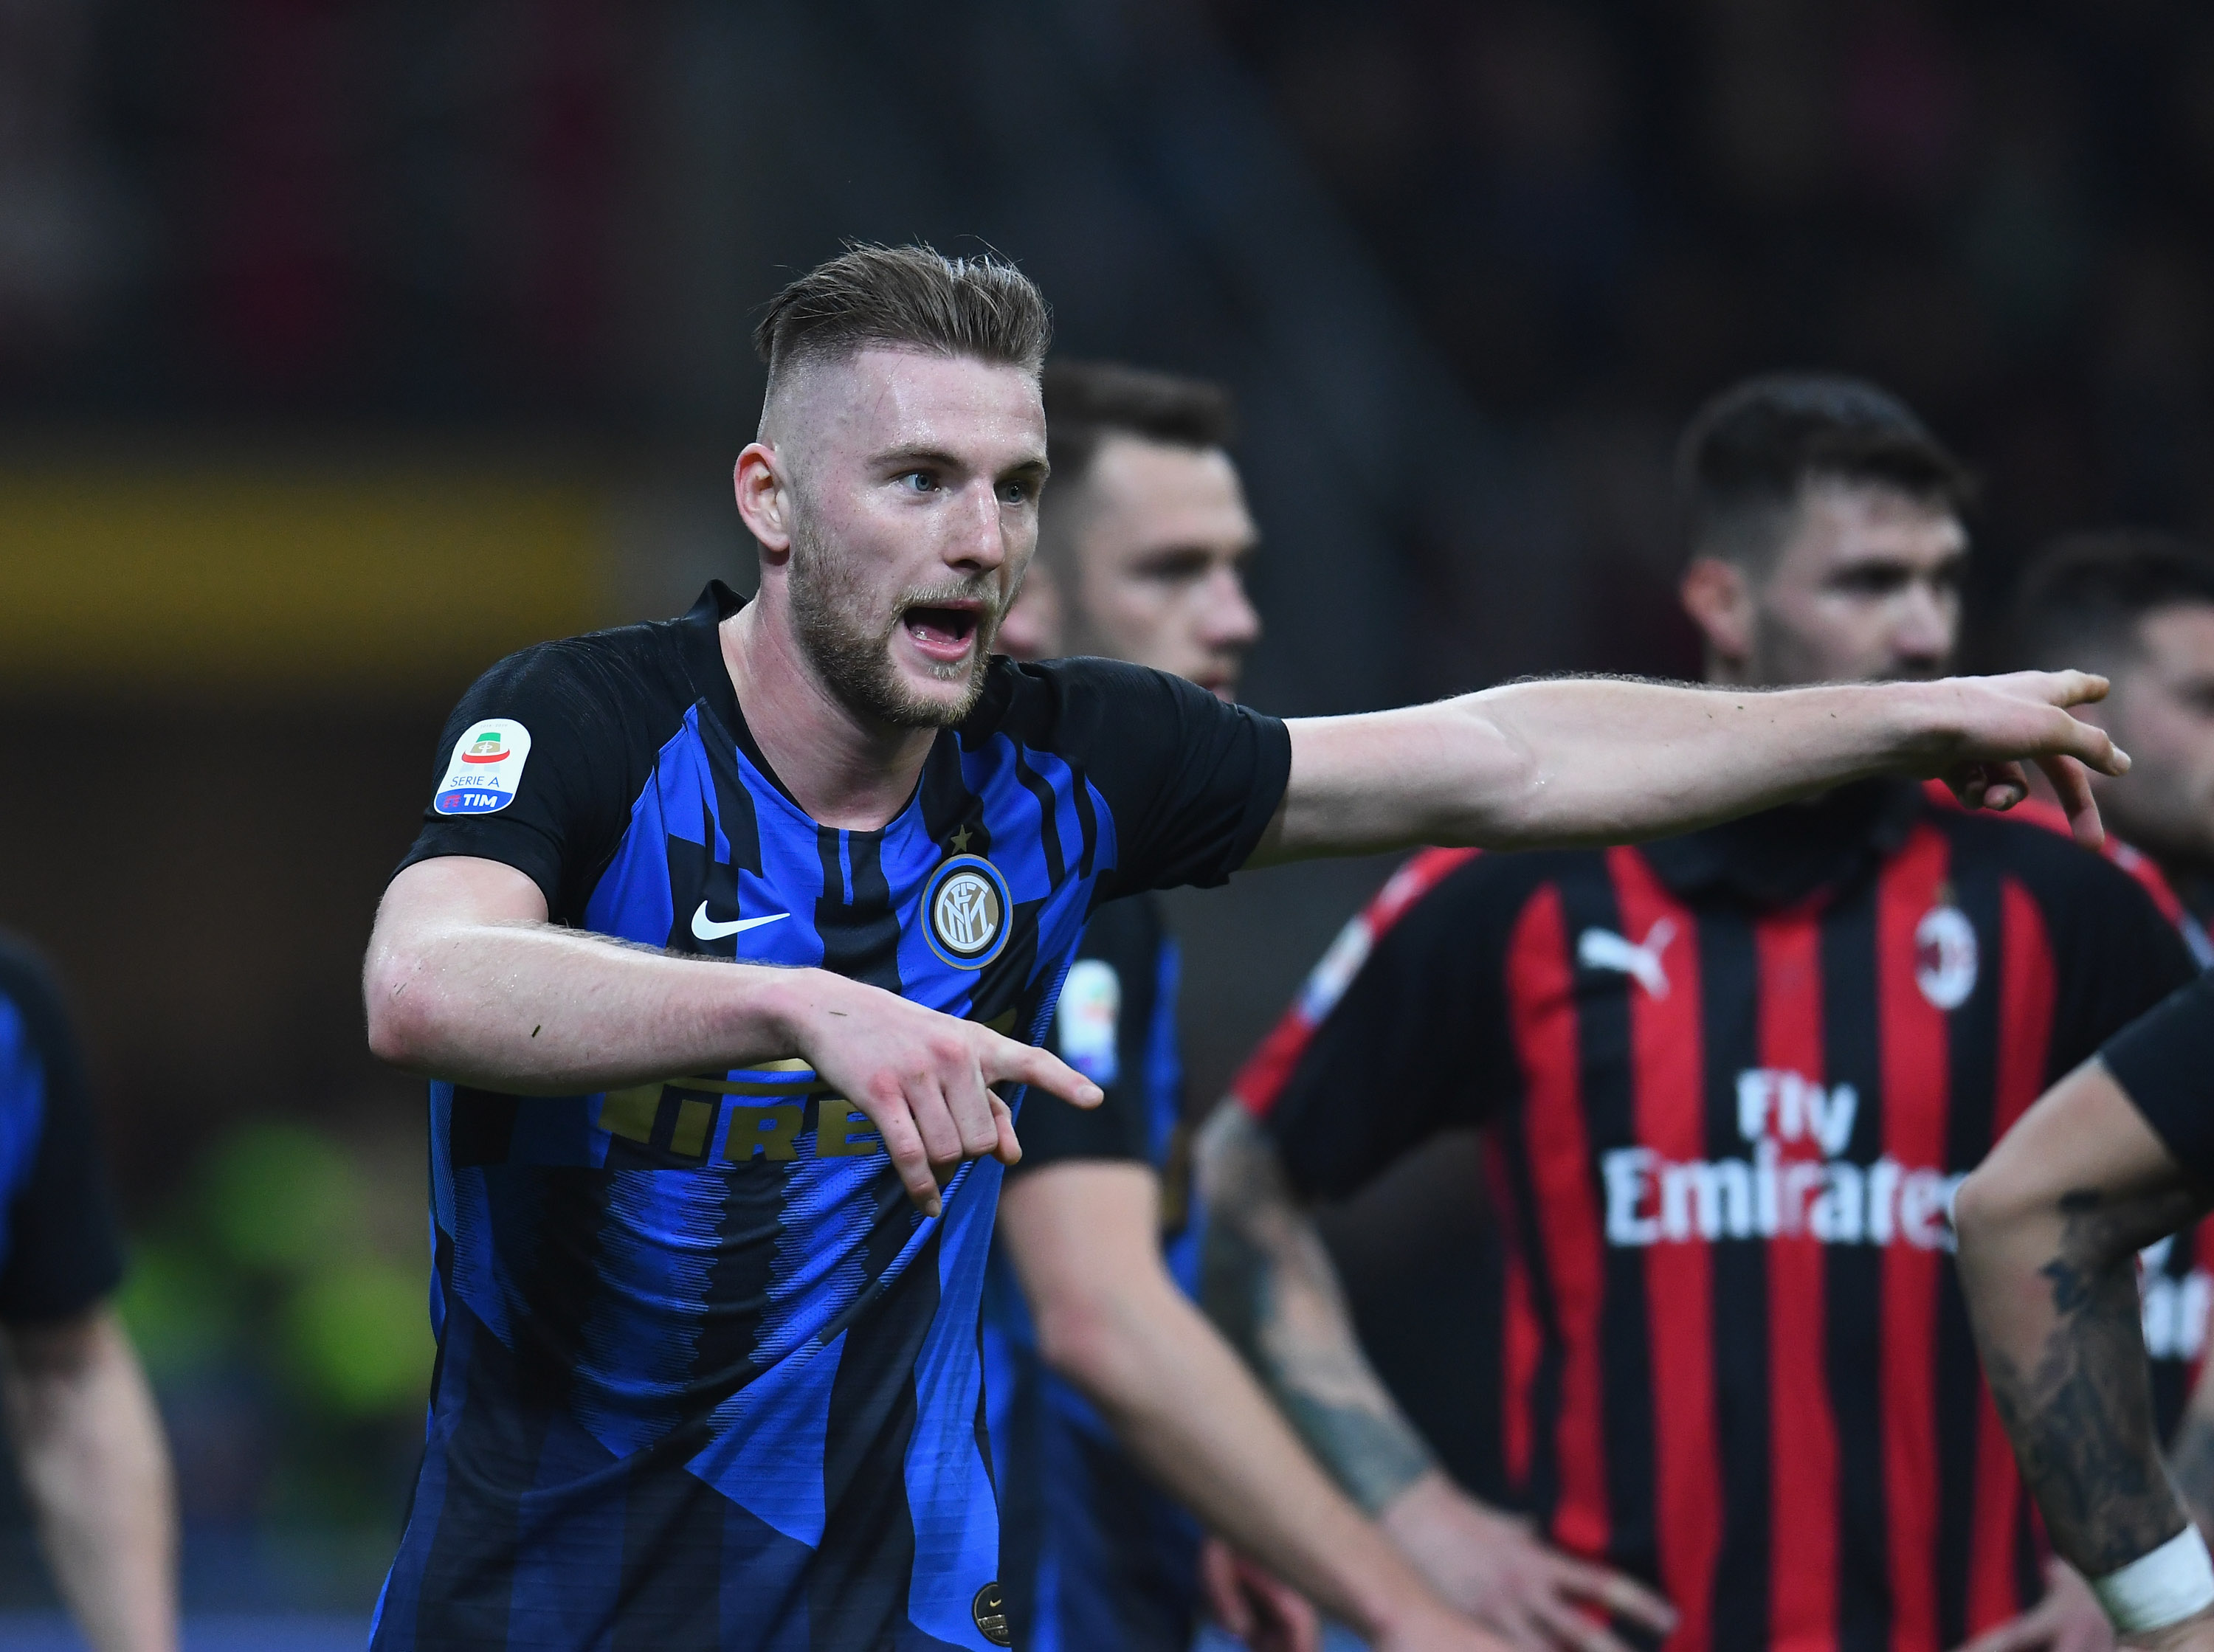 MILAN, ITALY - MARCH 17:  Milan Skriniar of FC Internazionale reacts during the Serie A match between AC Milan and FC Internazionale at Stadio Giuseppe Meazza on March 17, 2019 in Milan, Italy.  (Photo by Claudio Villa - Inter/Inter via Getty Images )